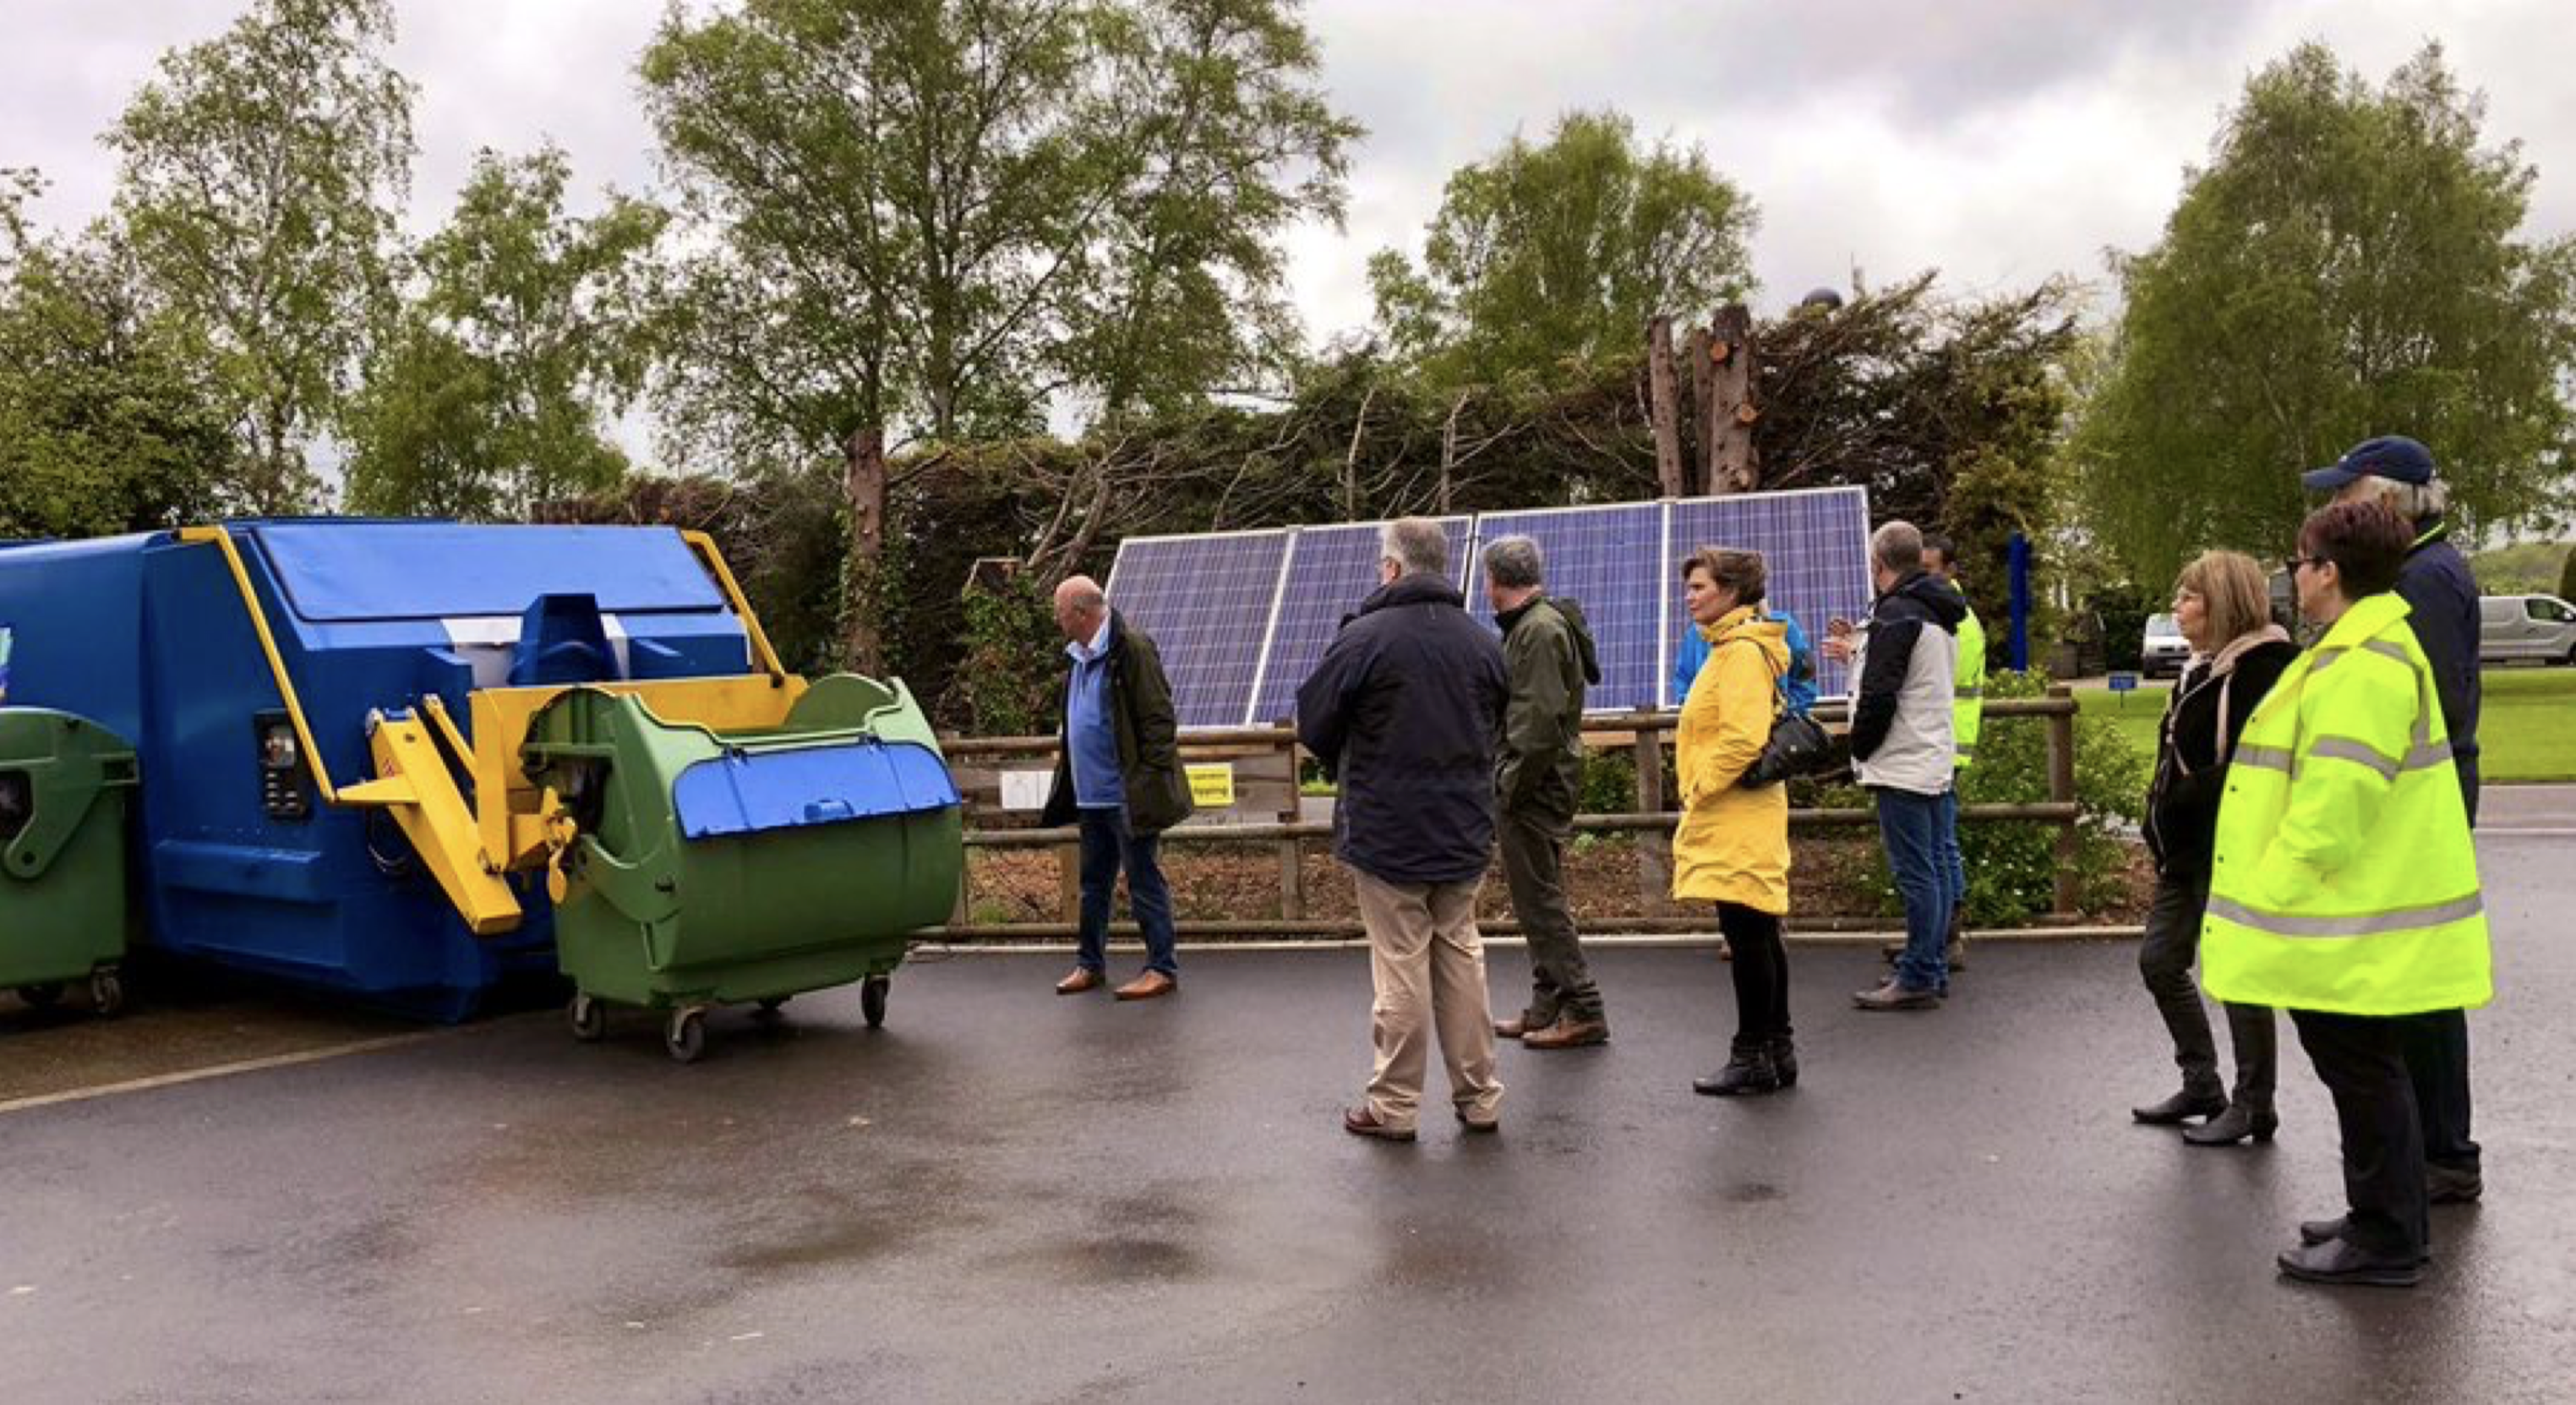 solar powered waste compactor